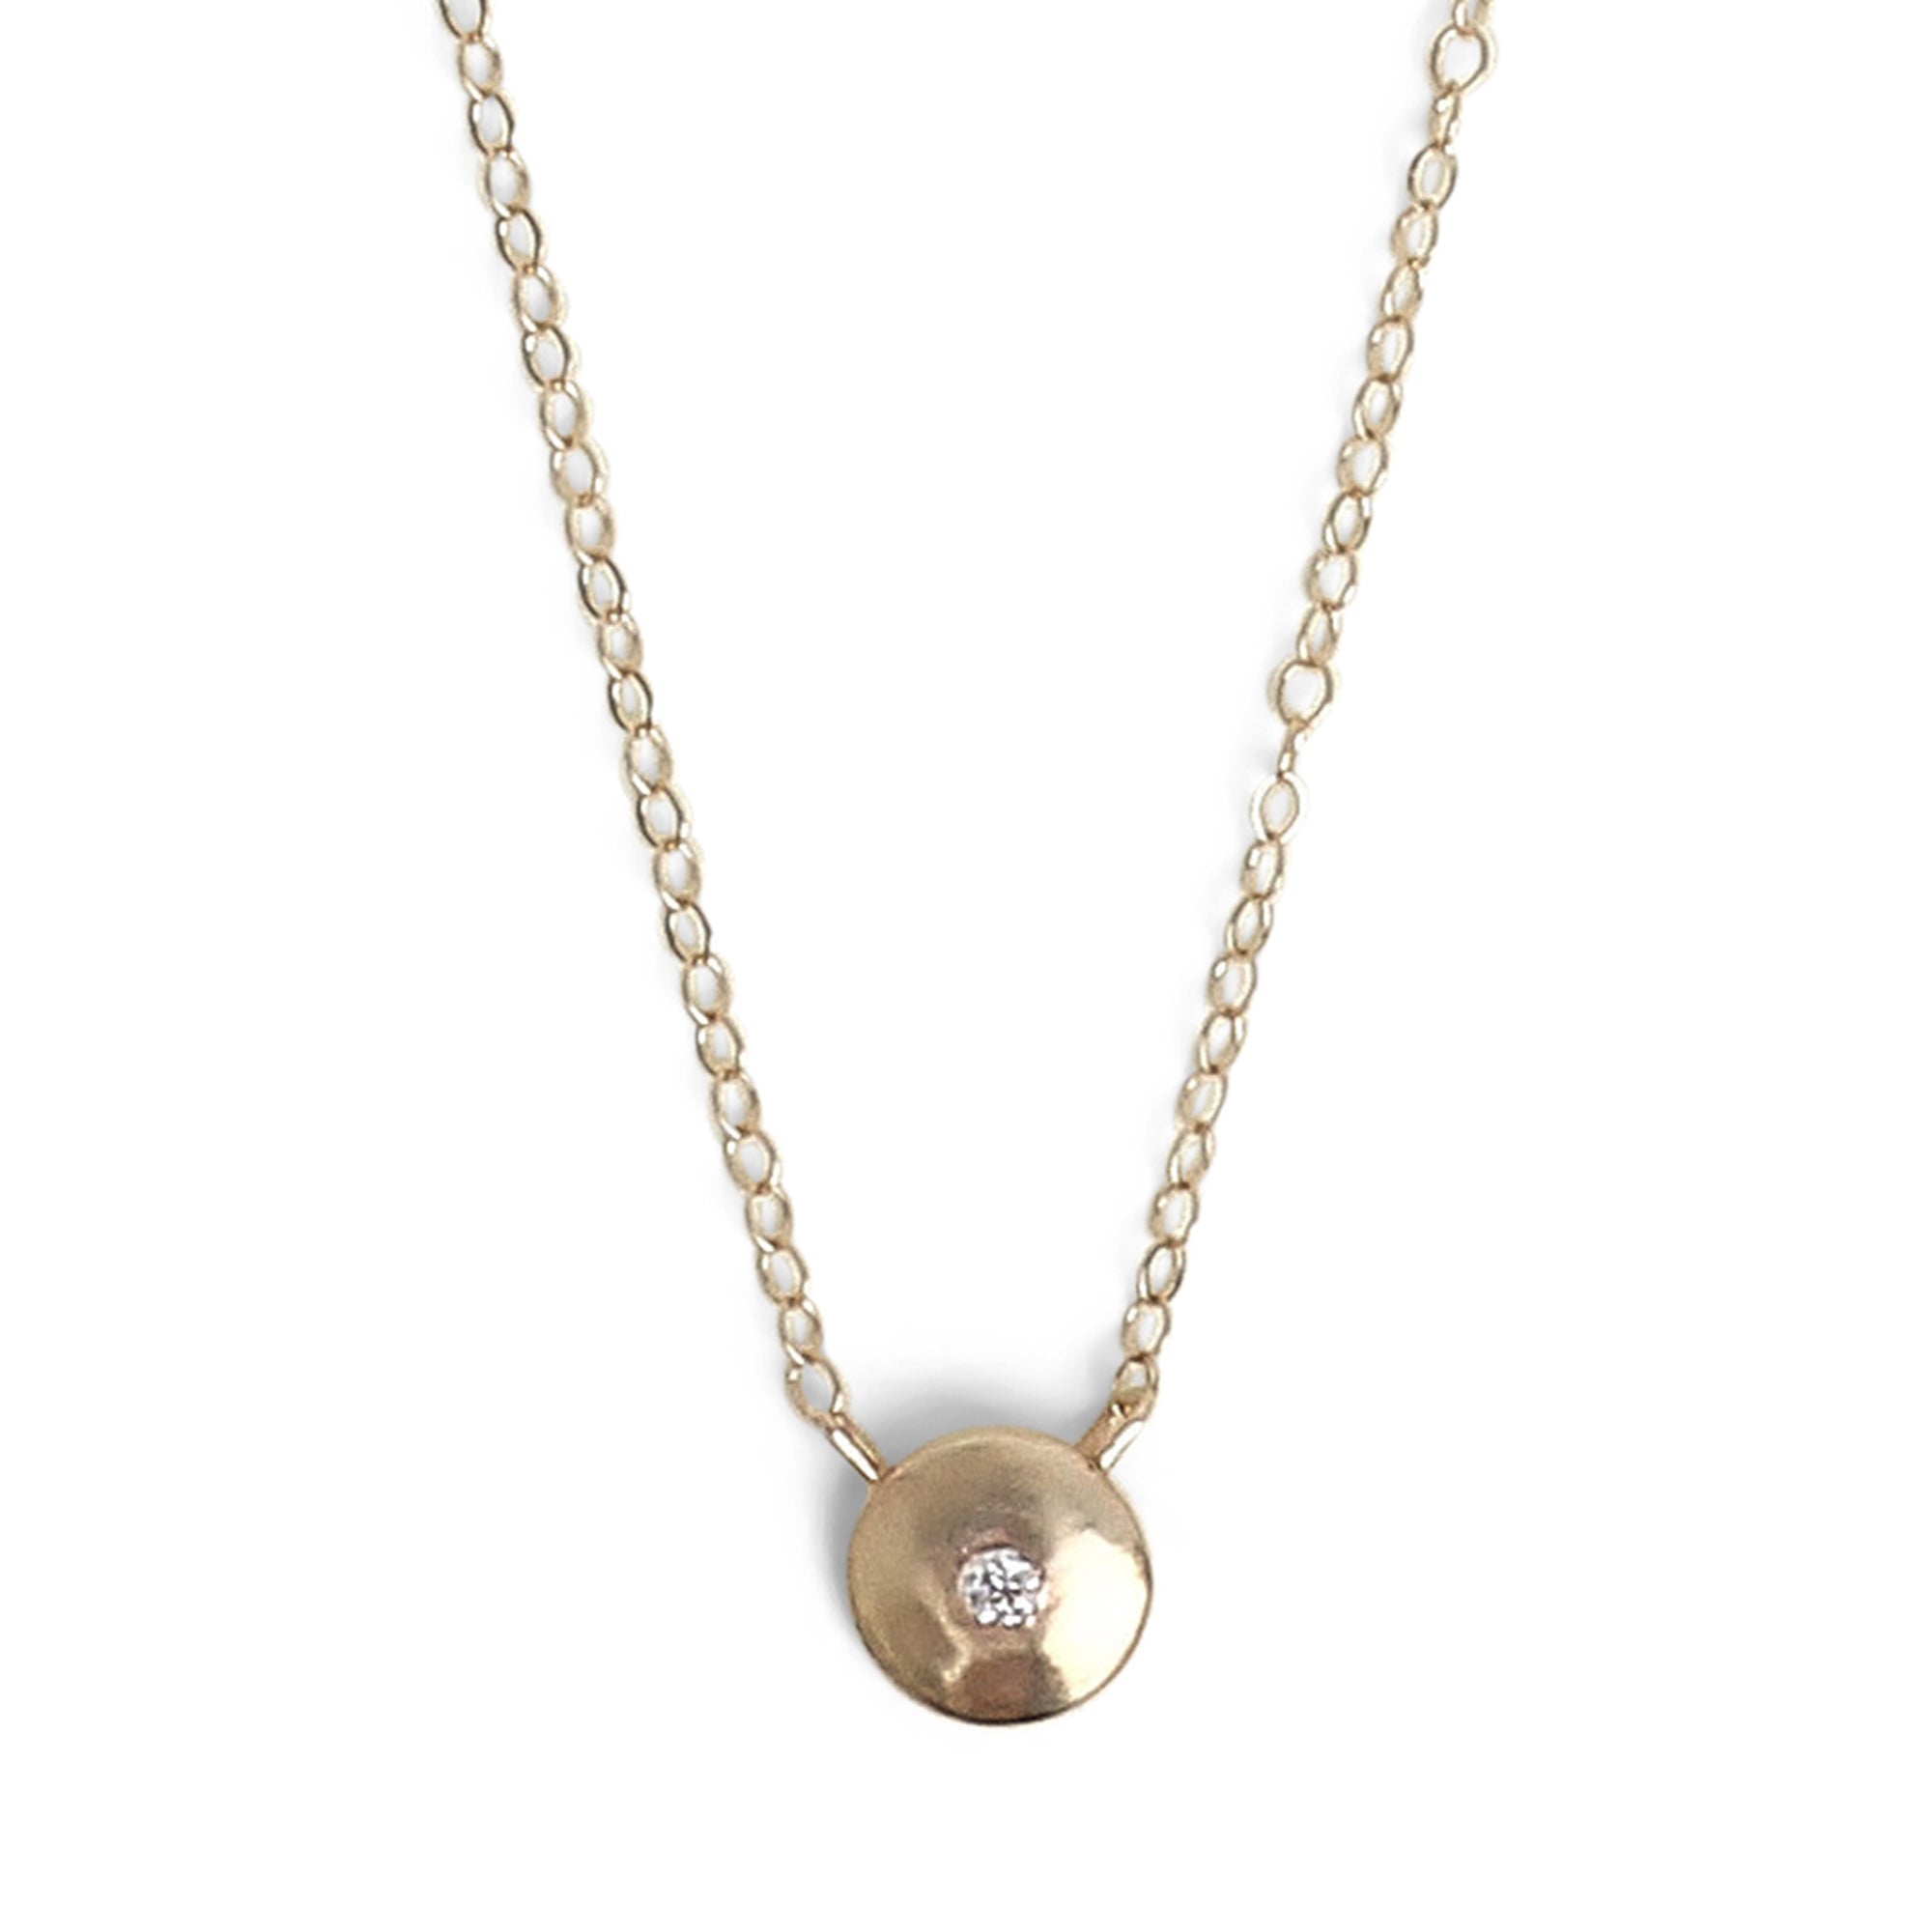 Simple yet striking, the Mini Disc Necklace highlights a single 0.03 tcw diamond, flush set in 14K gold.